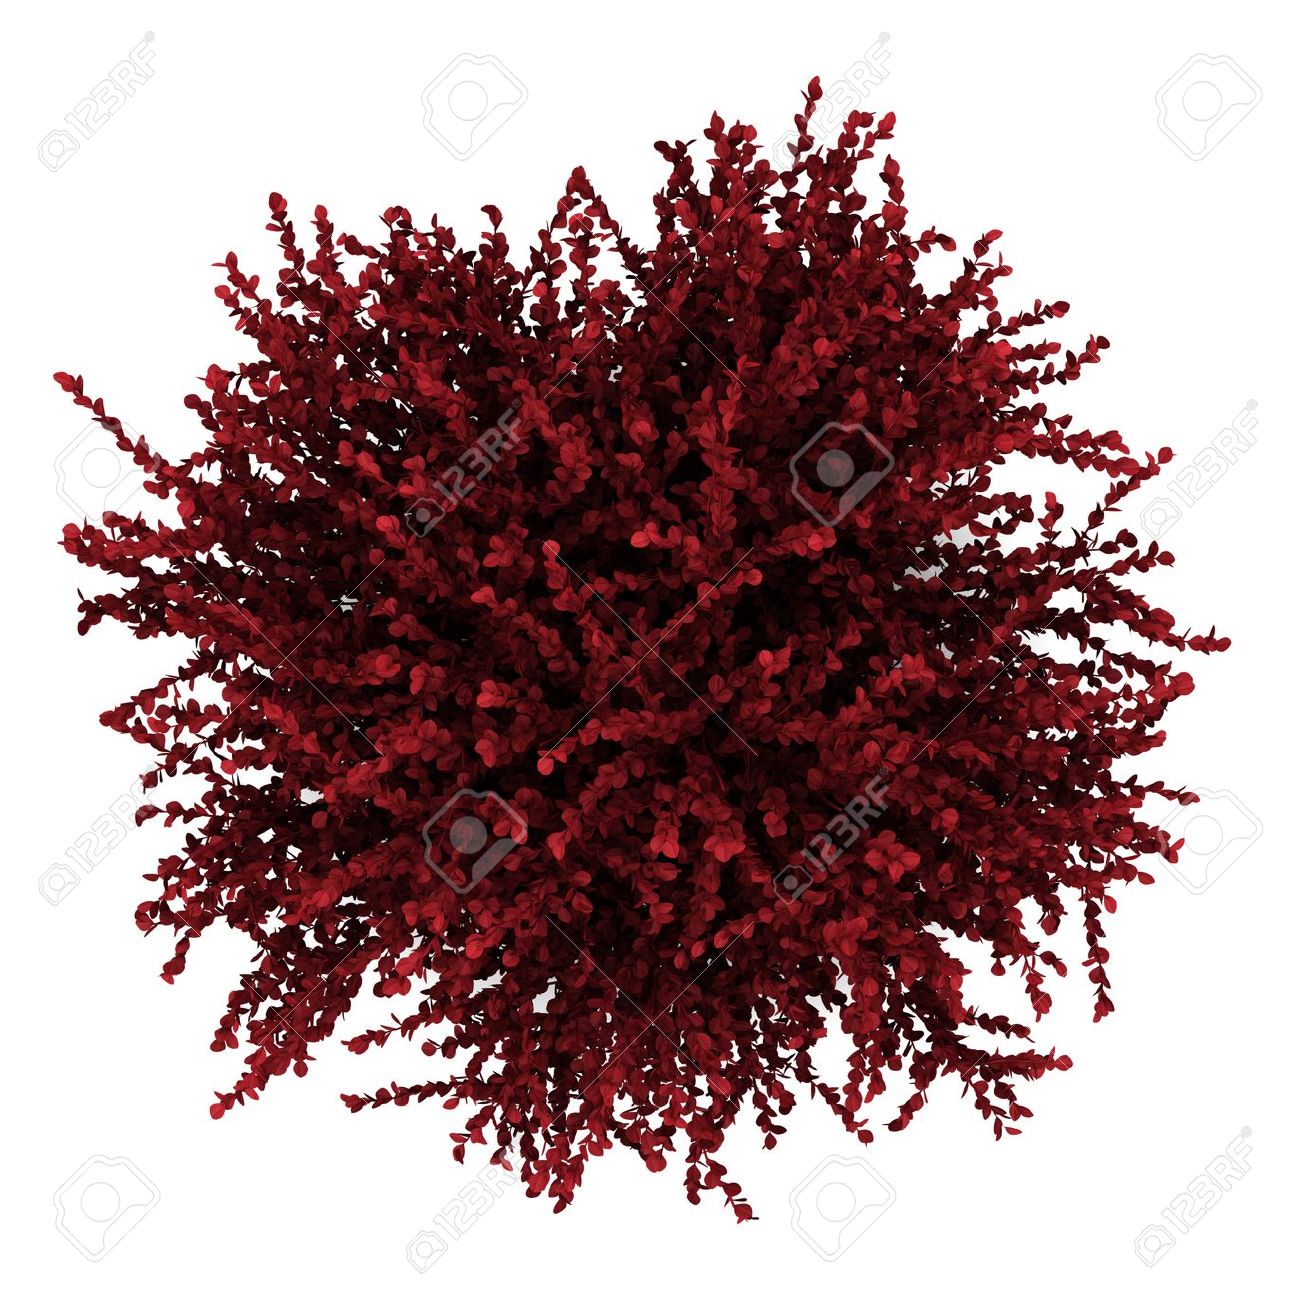 Red Bush Stock Photos & Pictures. Royalty Free Red Bush Images And.